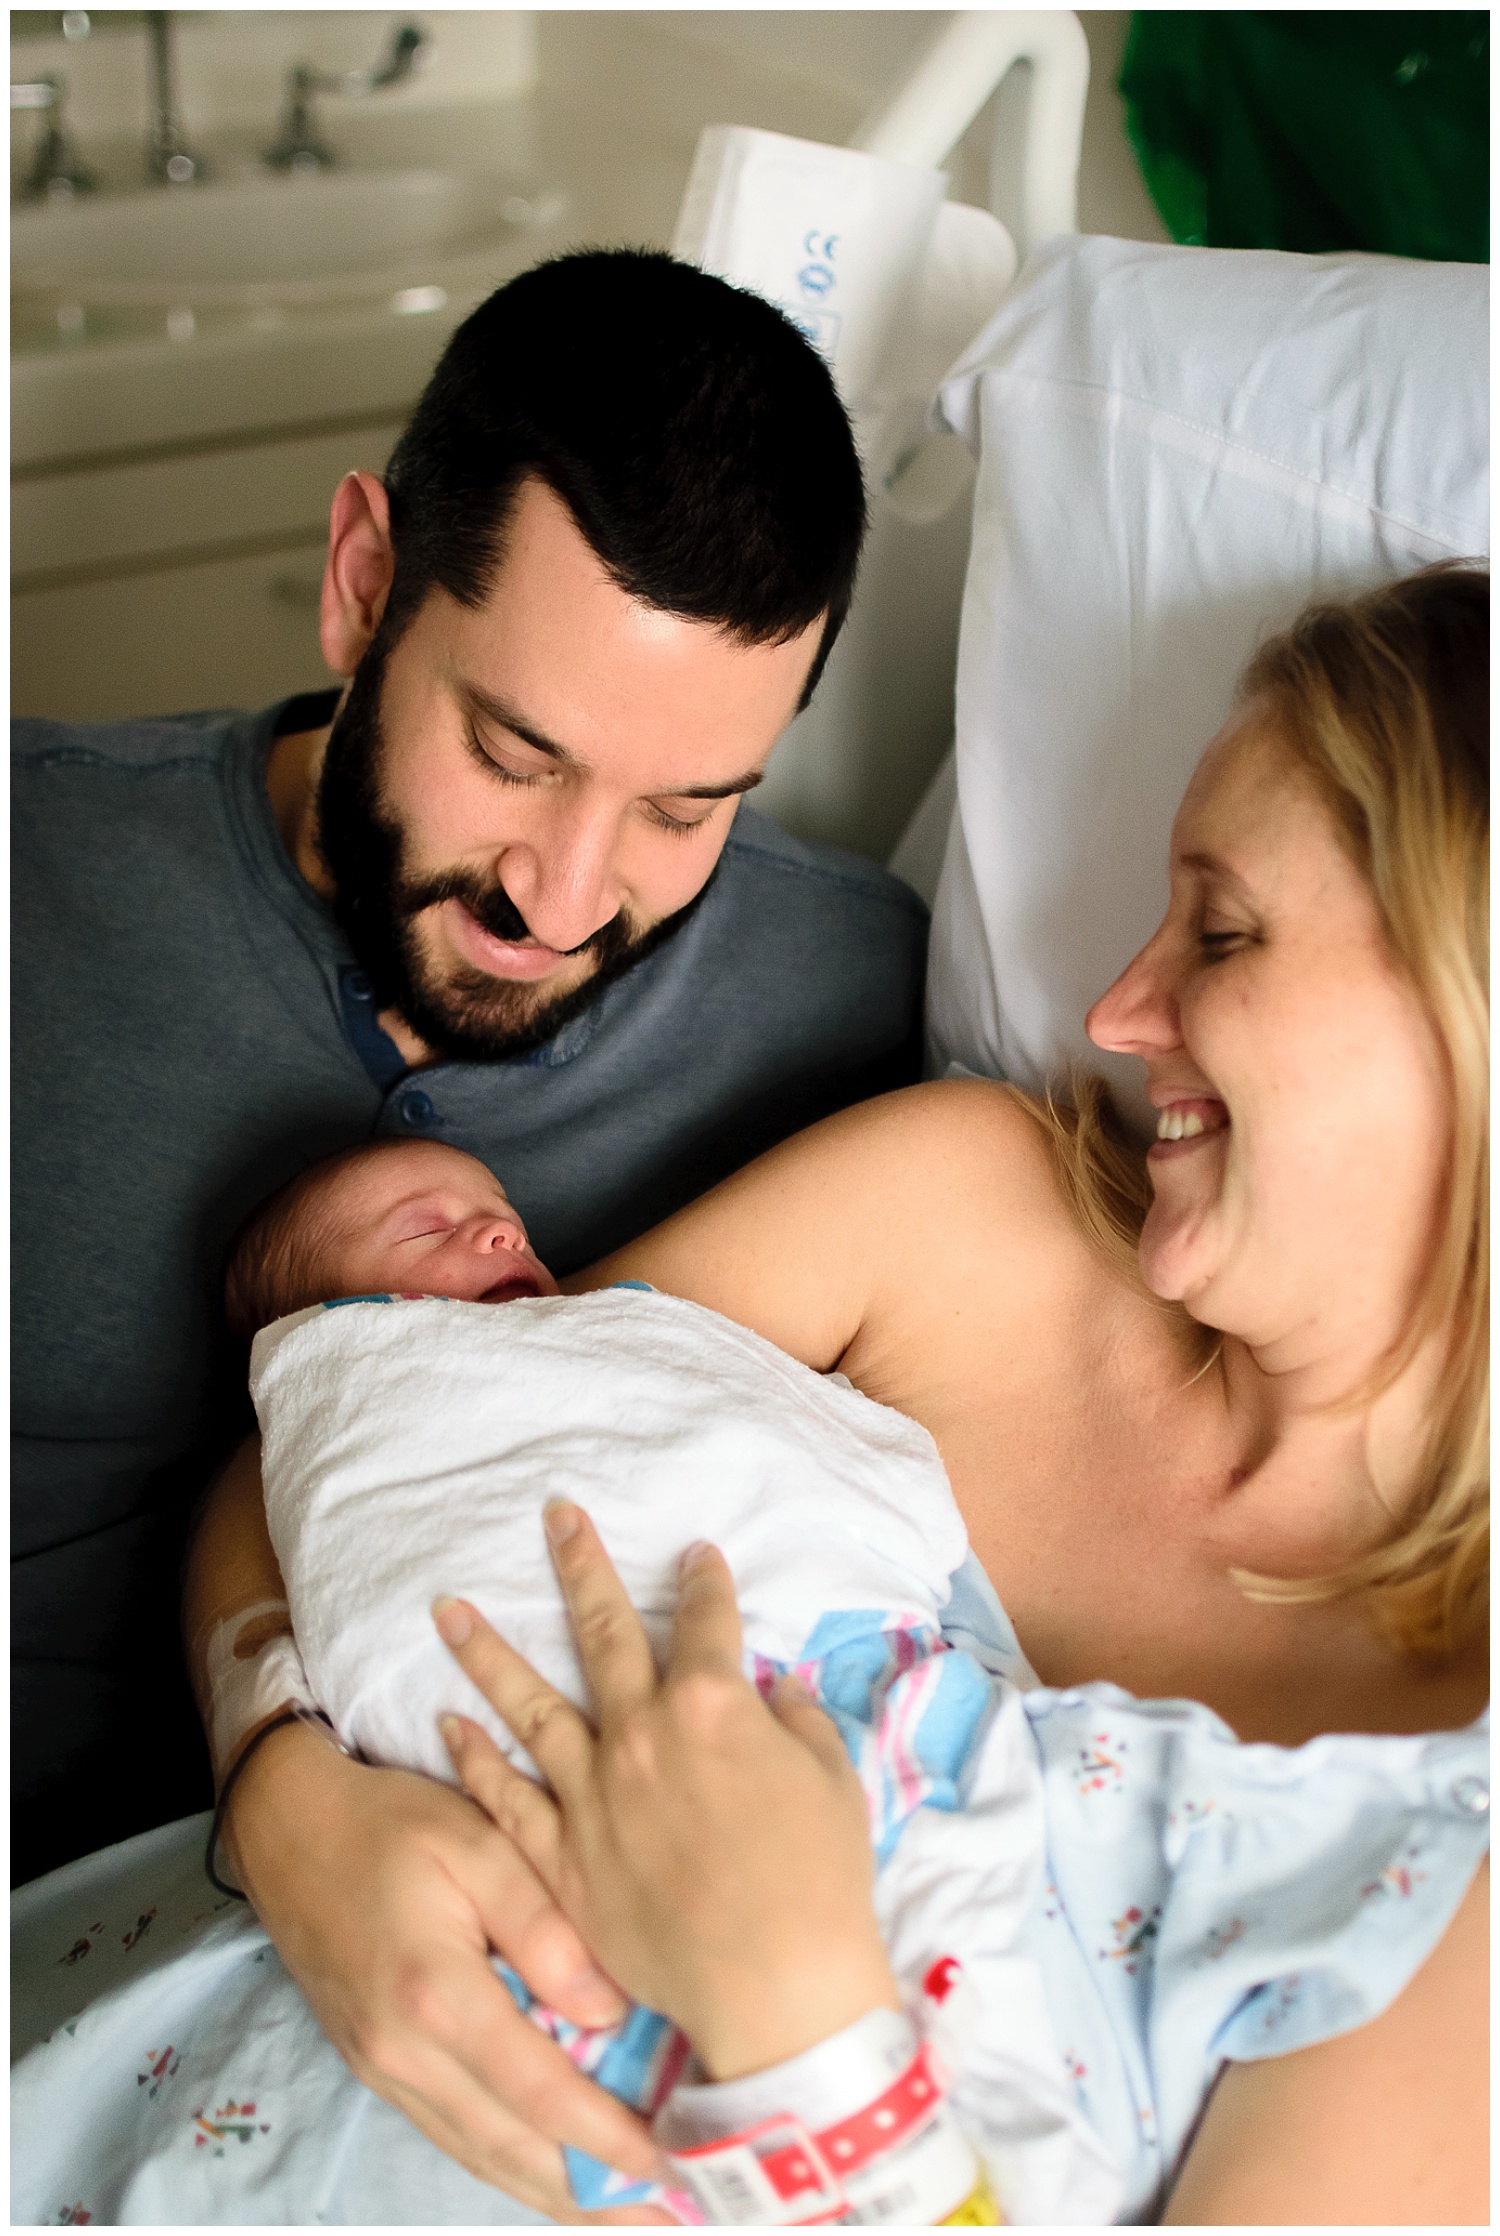 this is an image taken during a fresh 48 newborn session in atlanta georgia. mom and dad are holding and looking at their newborn baby girl.